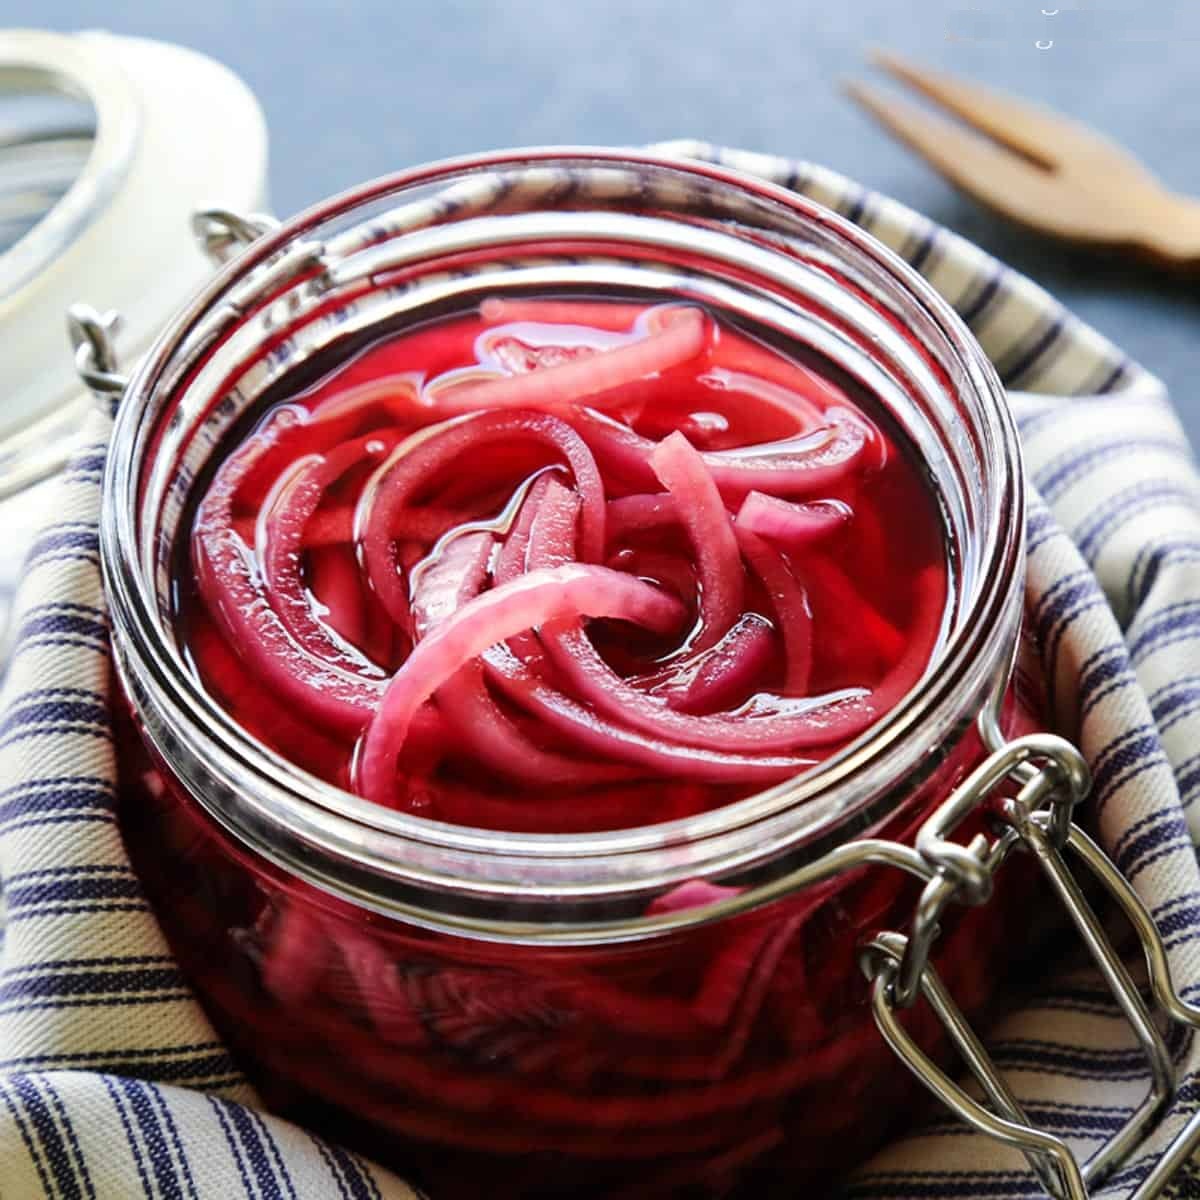 How To Store Cut Red Onions